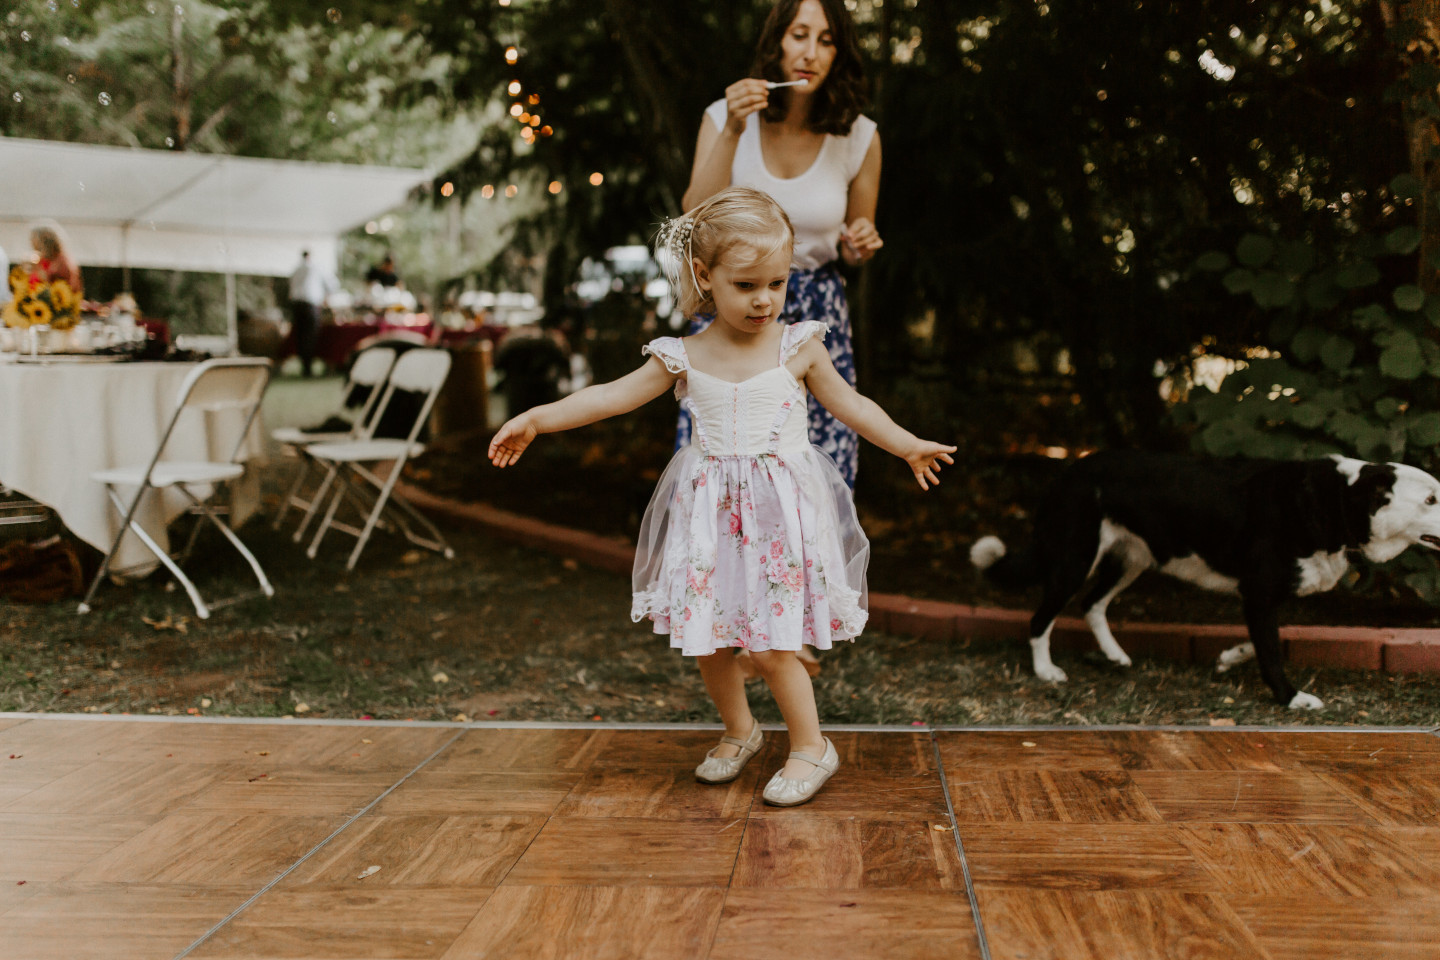 A little girl dances at the wedding in Corvallis, Oregon. Intimate wedding photography in Corvallis Oregon by Sienna Plus Josh.